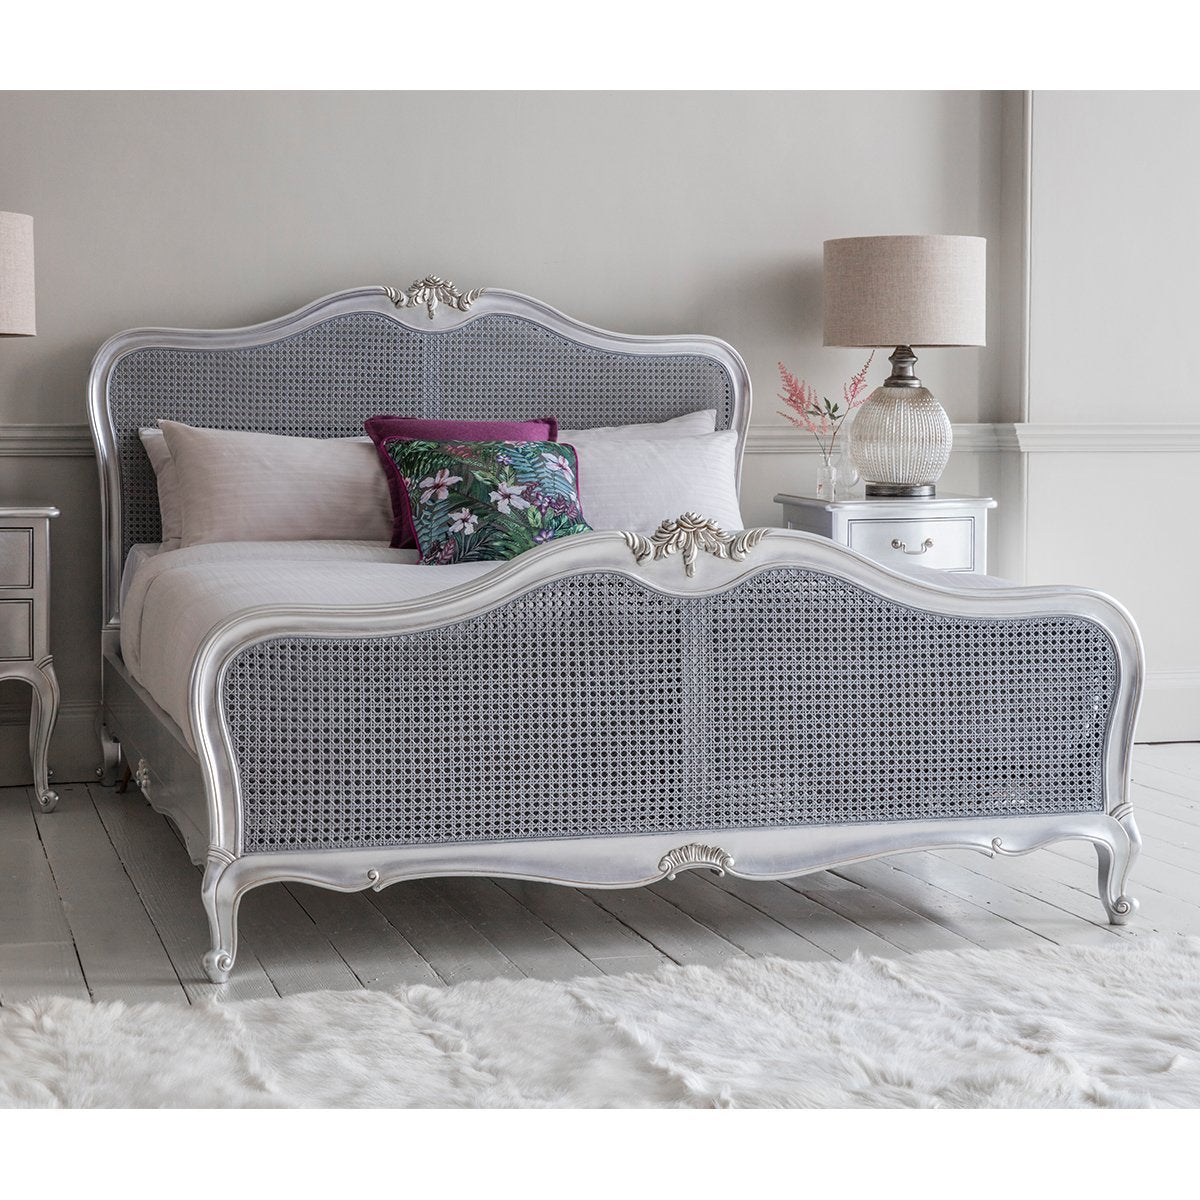 Gallery Direct Chic Cane King Size Bed In Silver